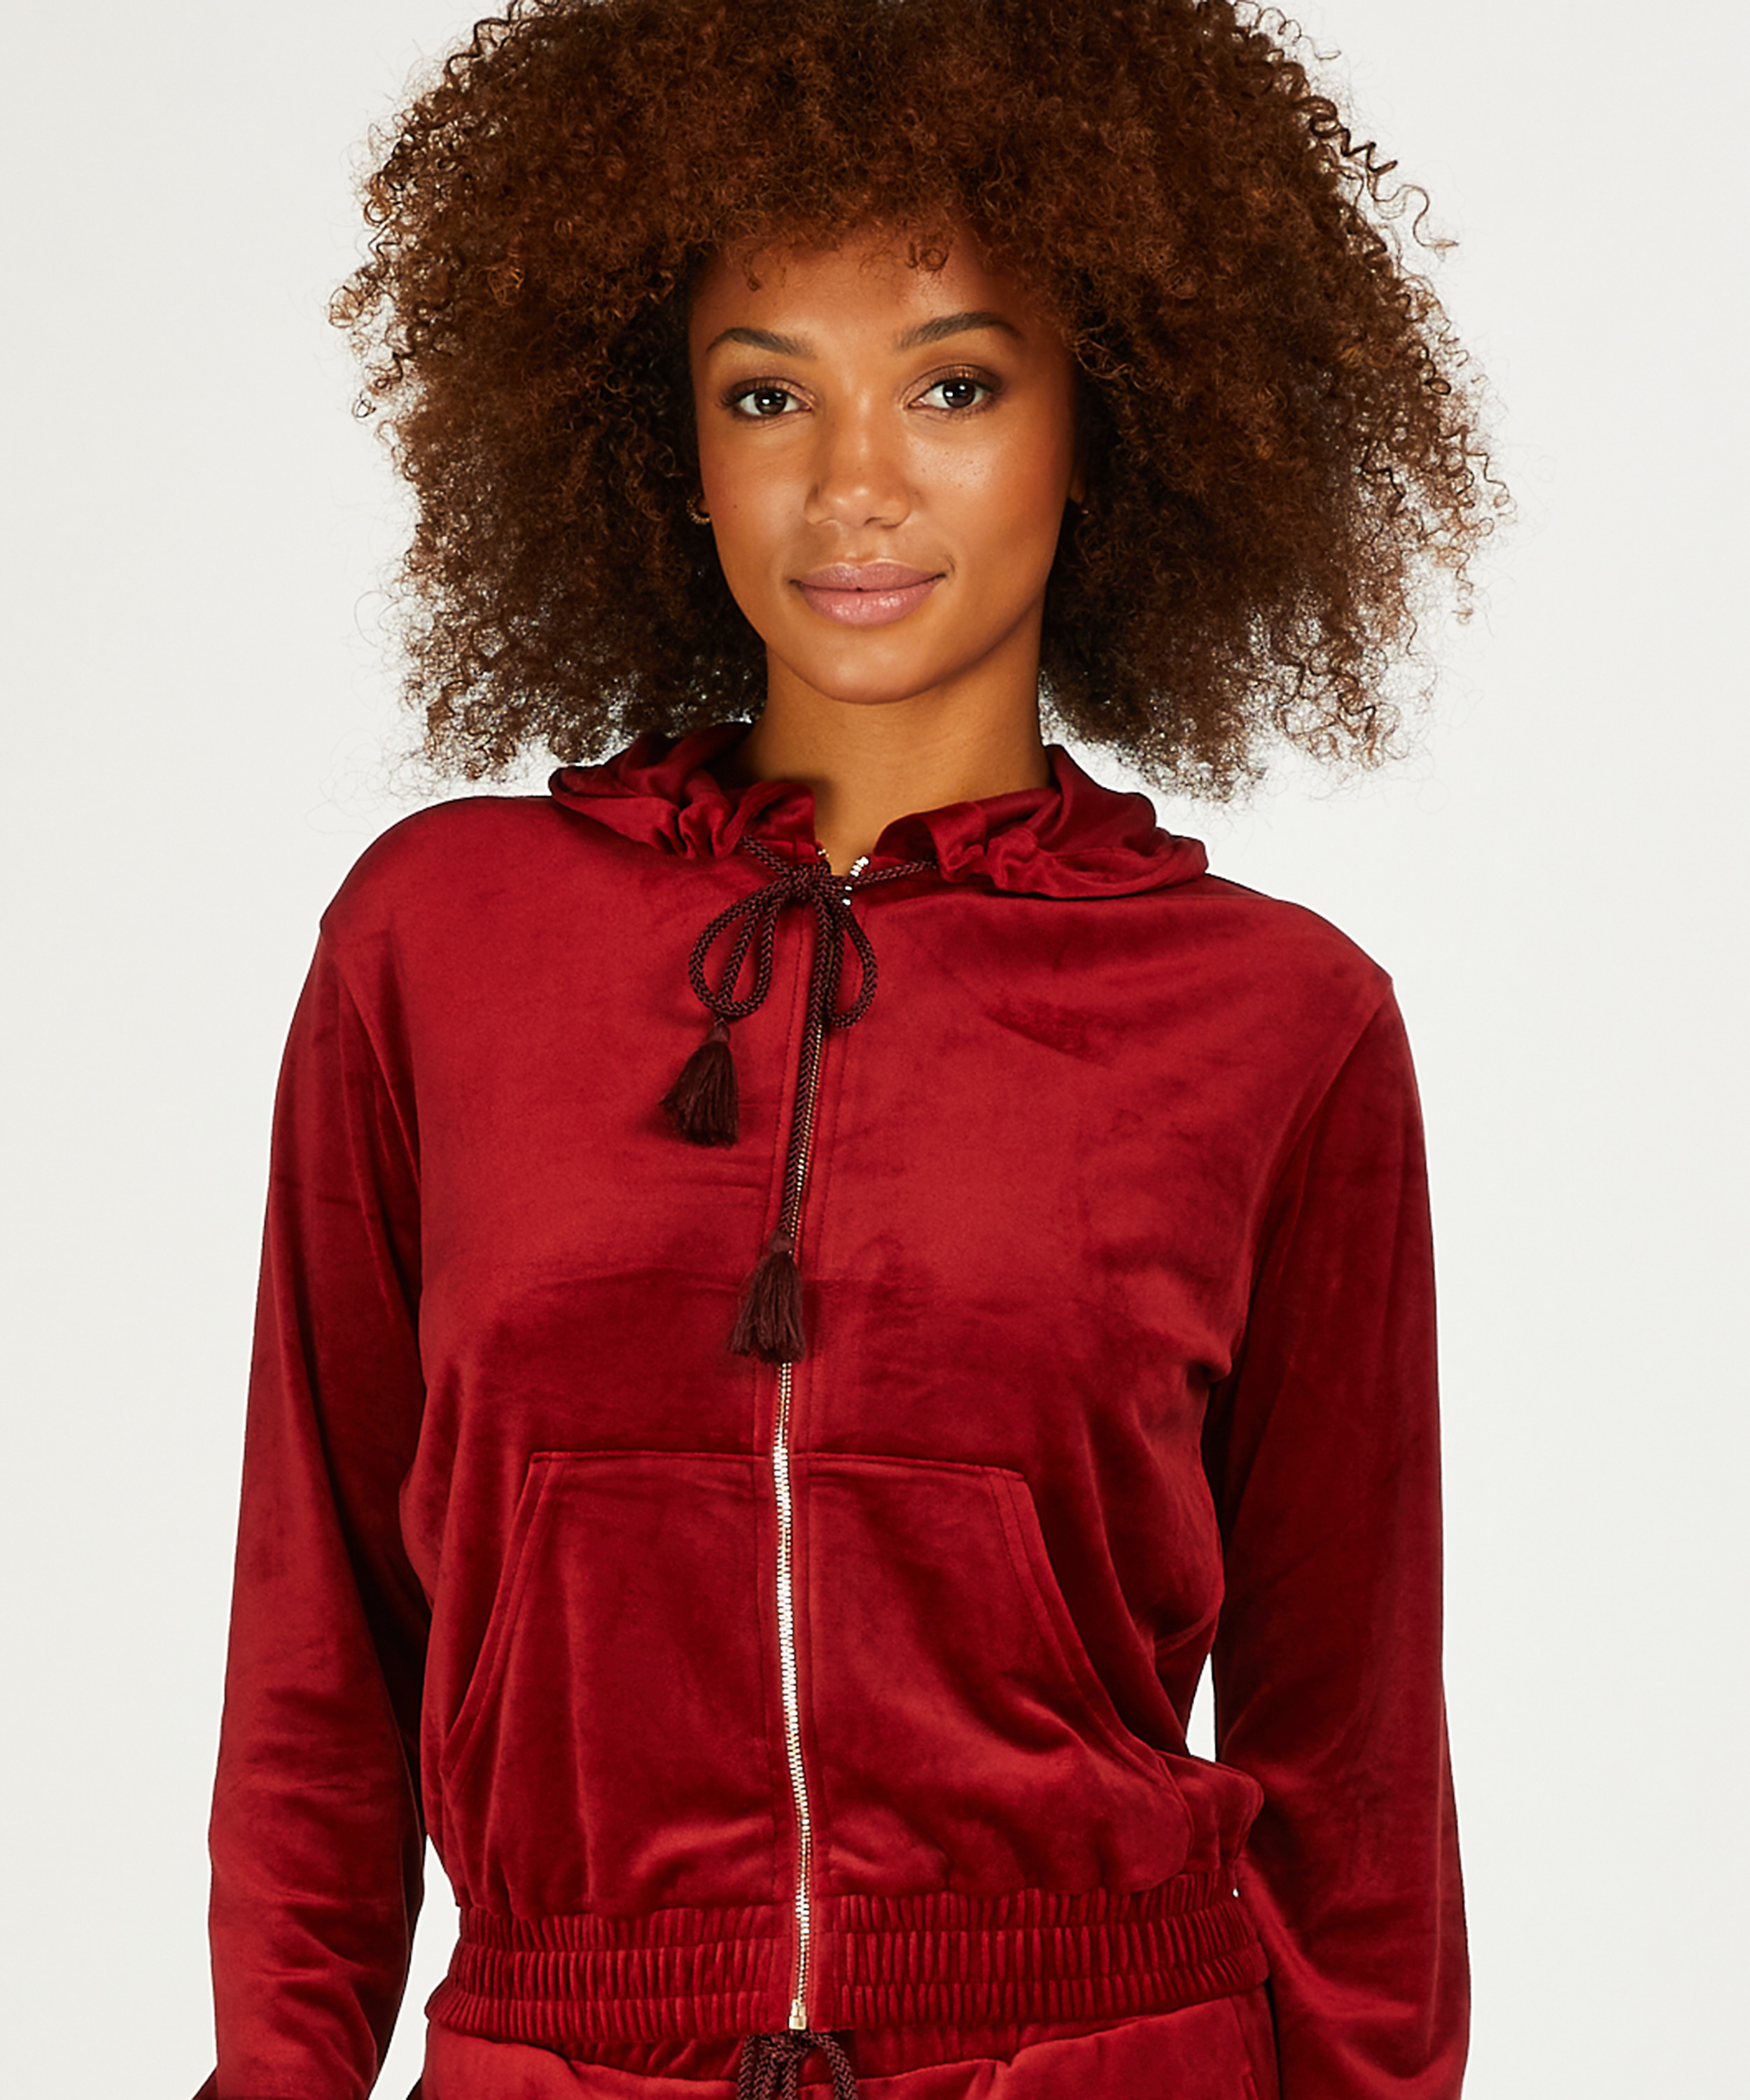 Top Velours, Rot, main